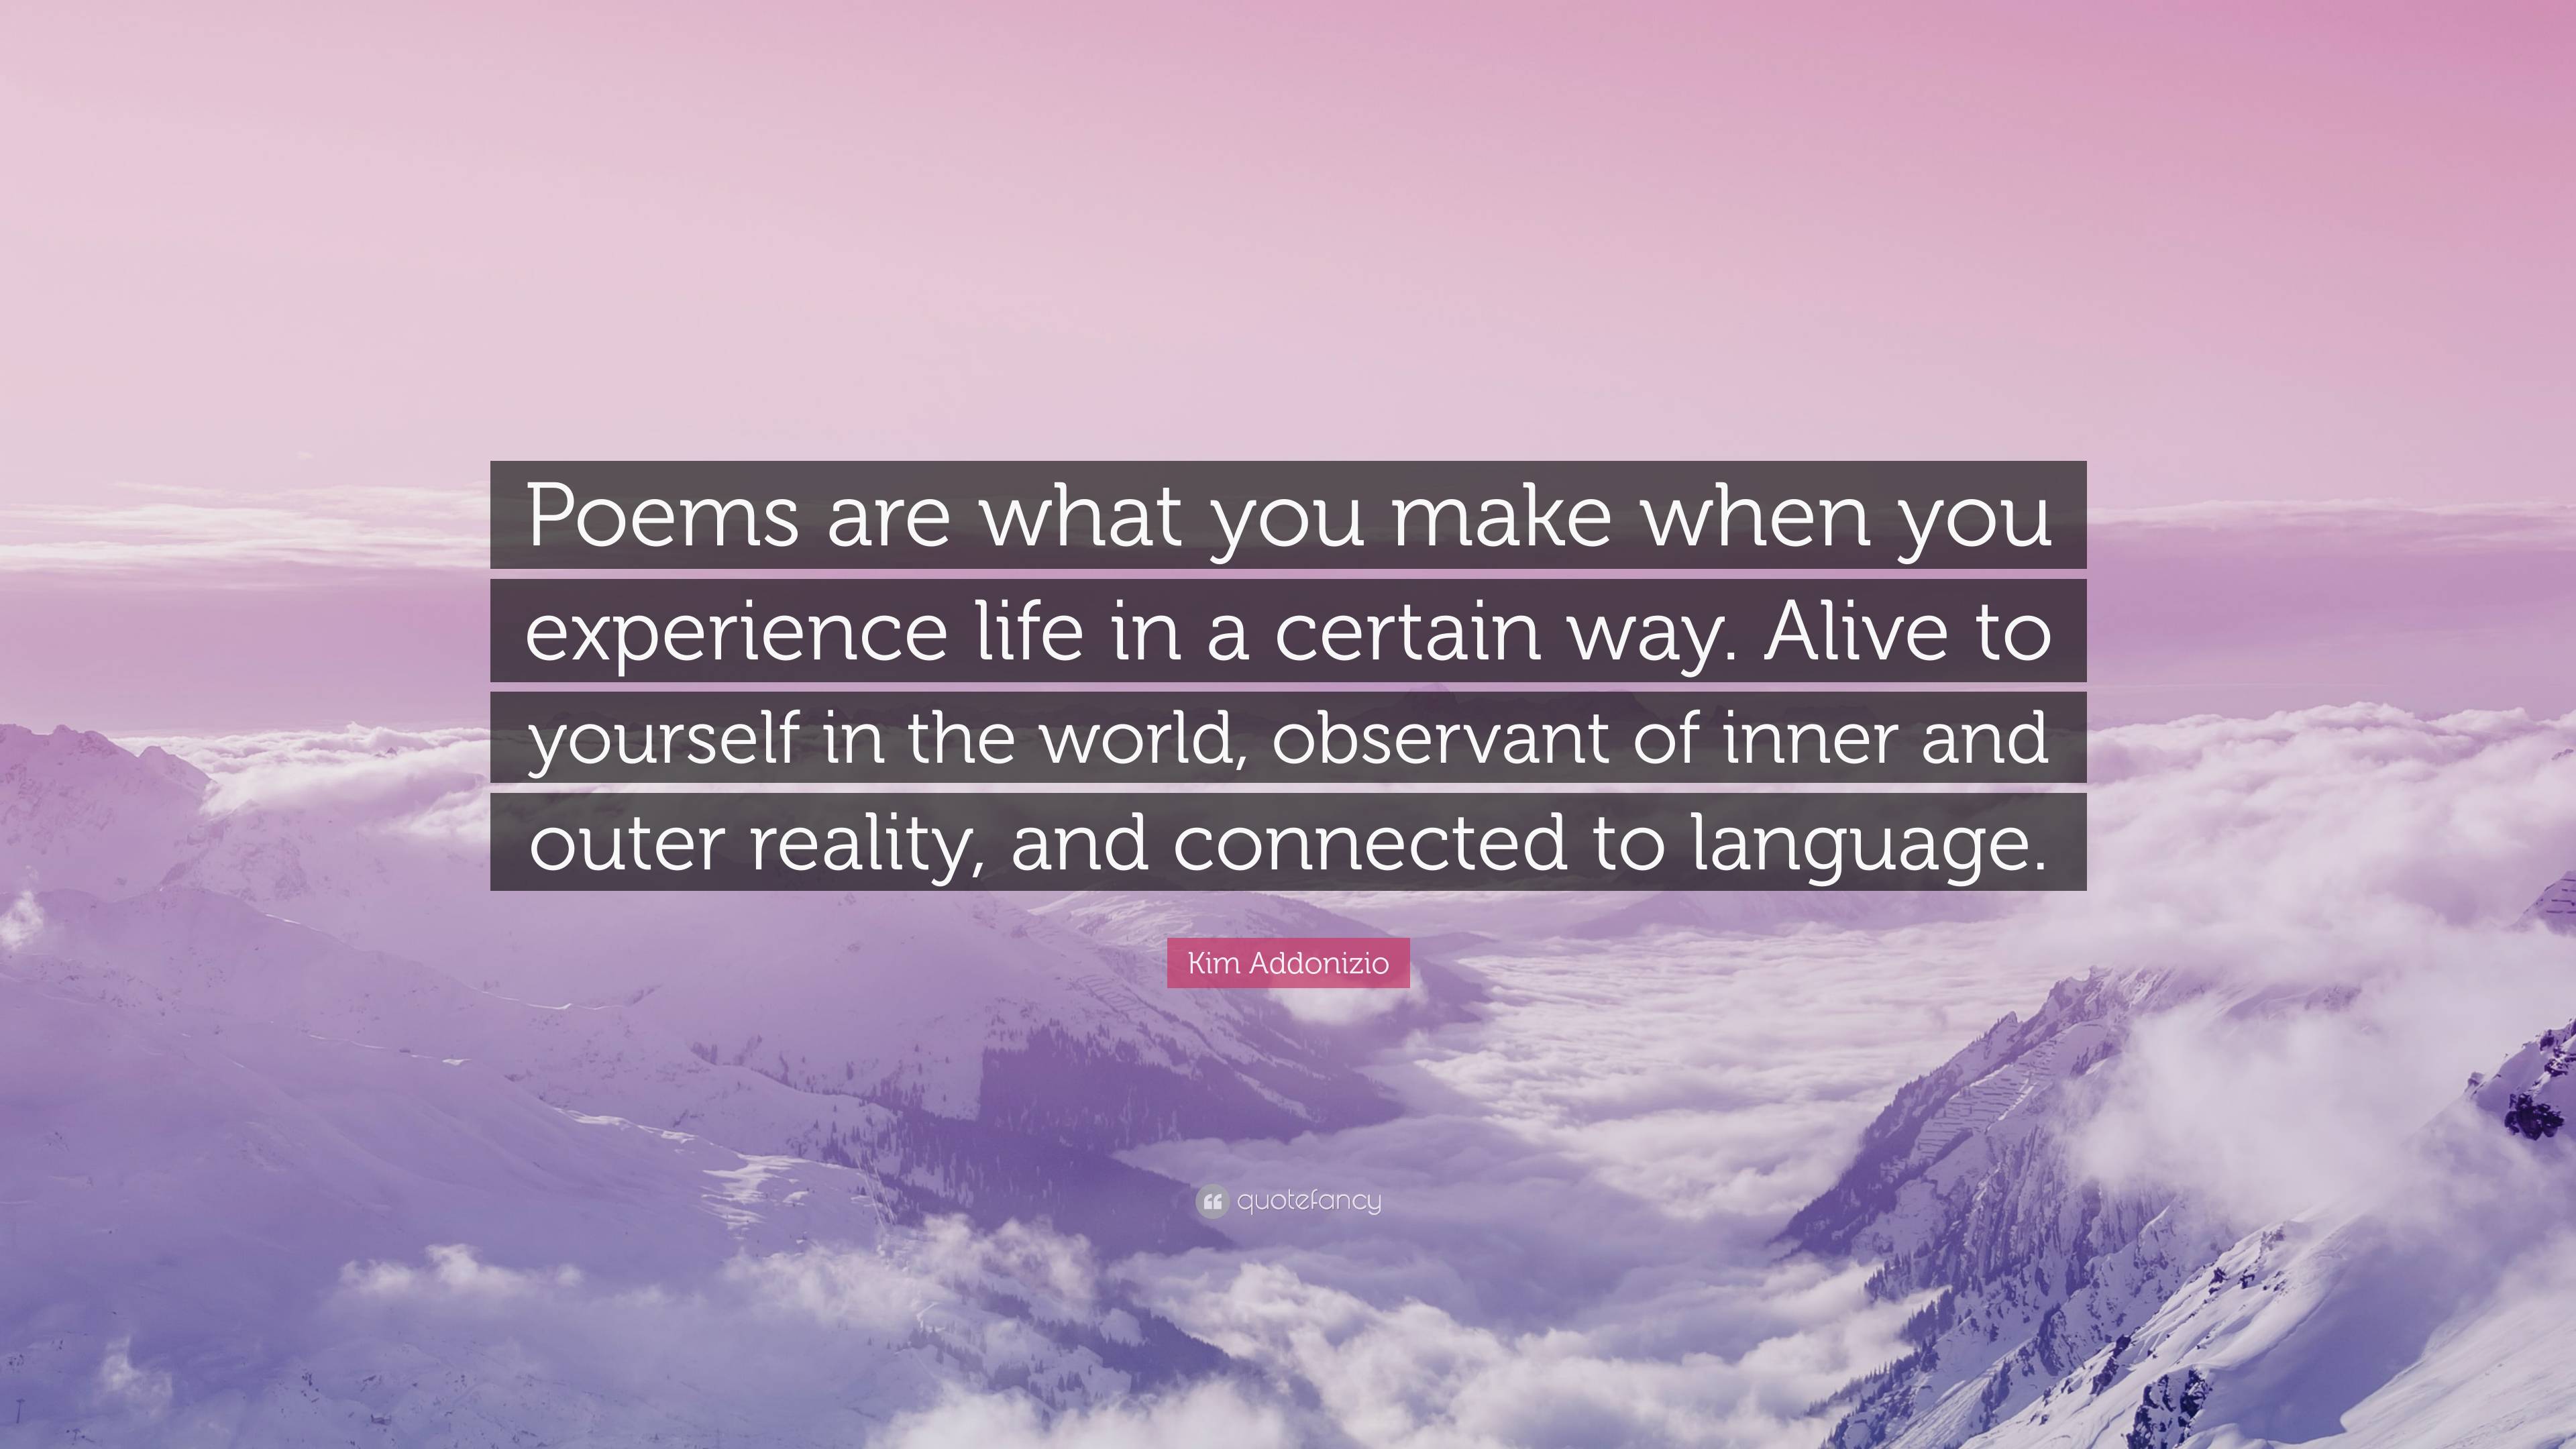 Kim Addonizio Quote: “Poems are what you make when you experience life ...